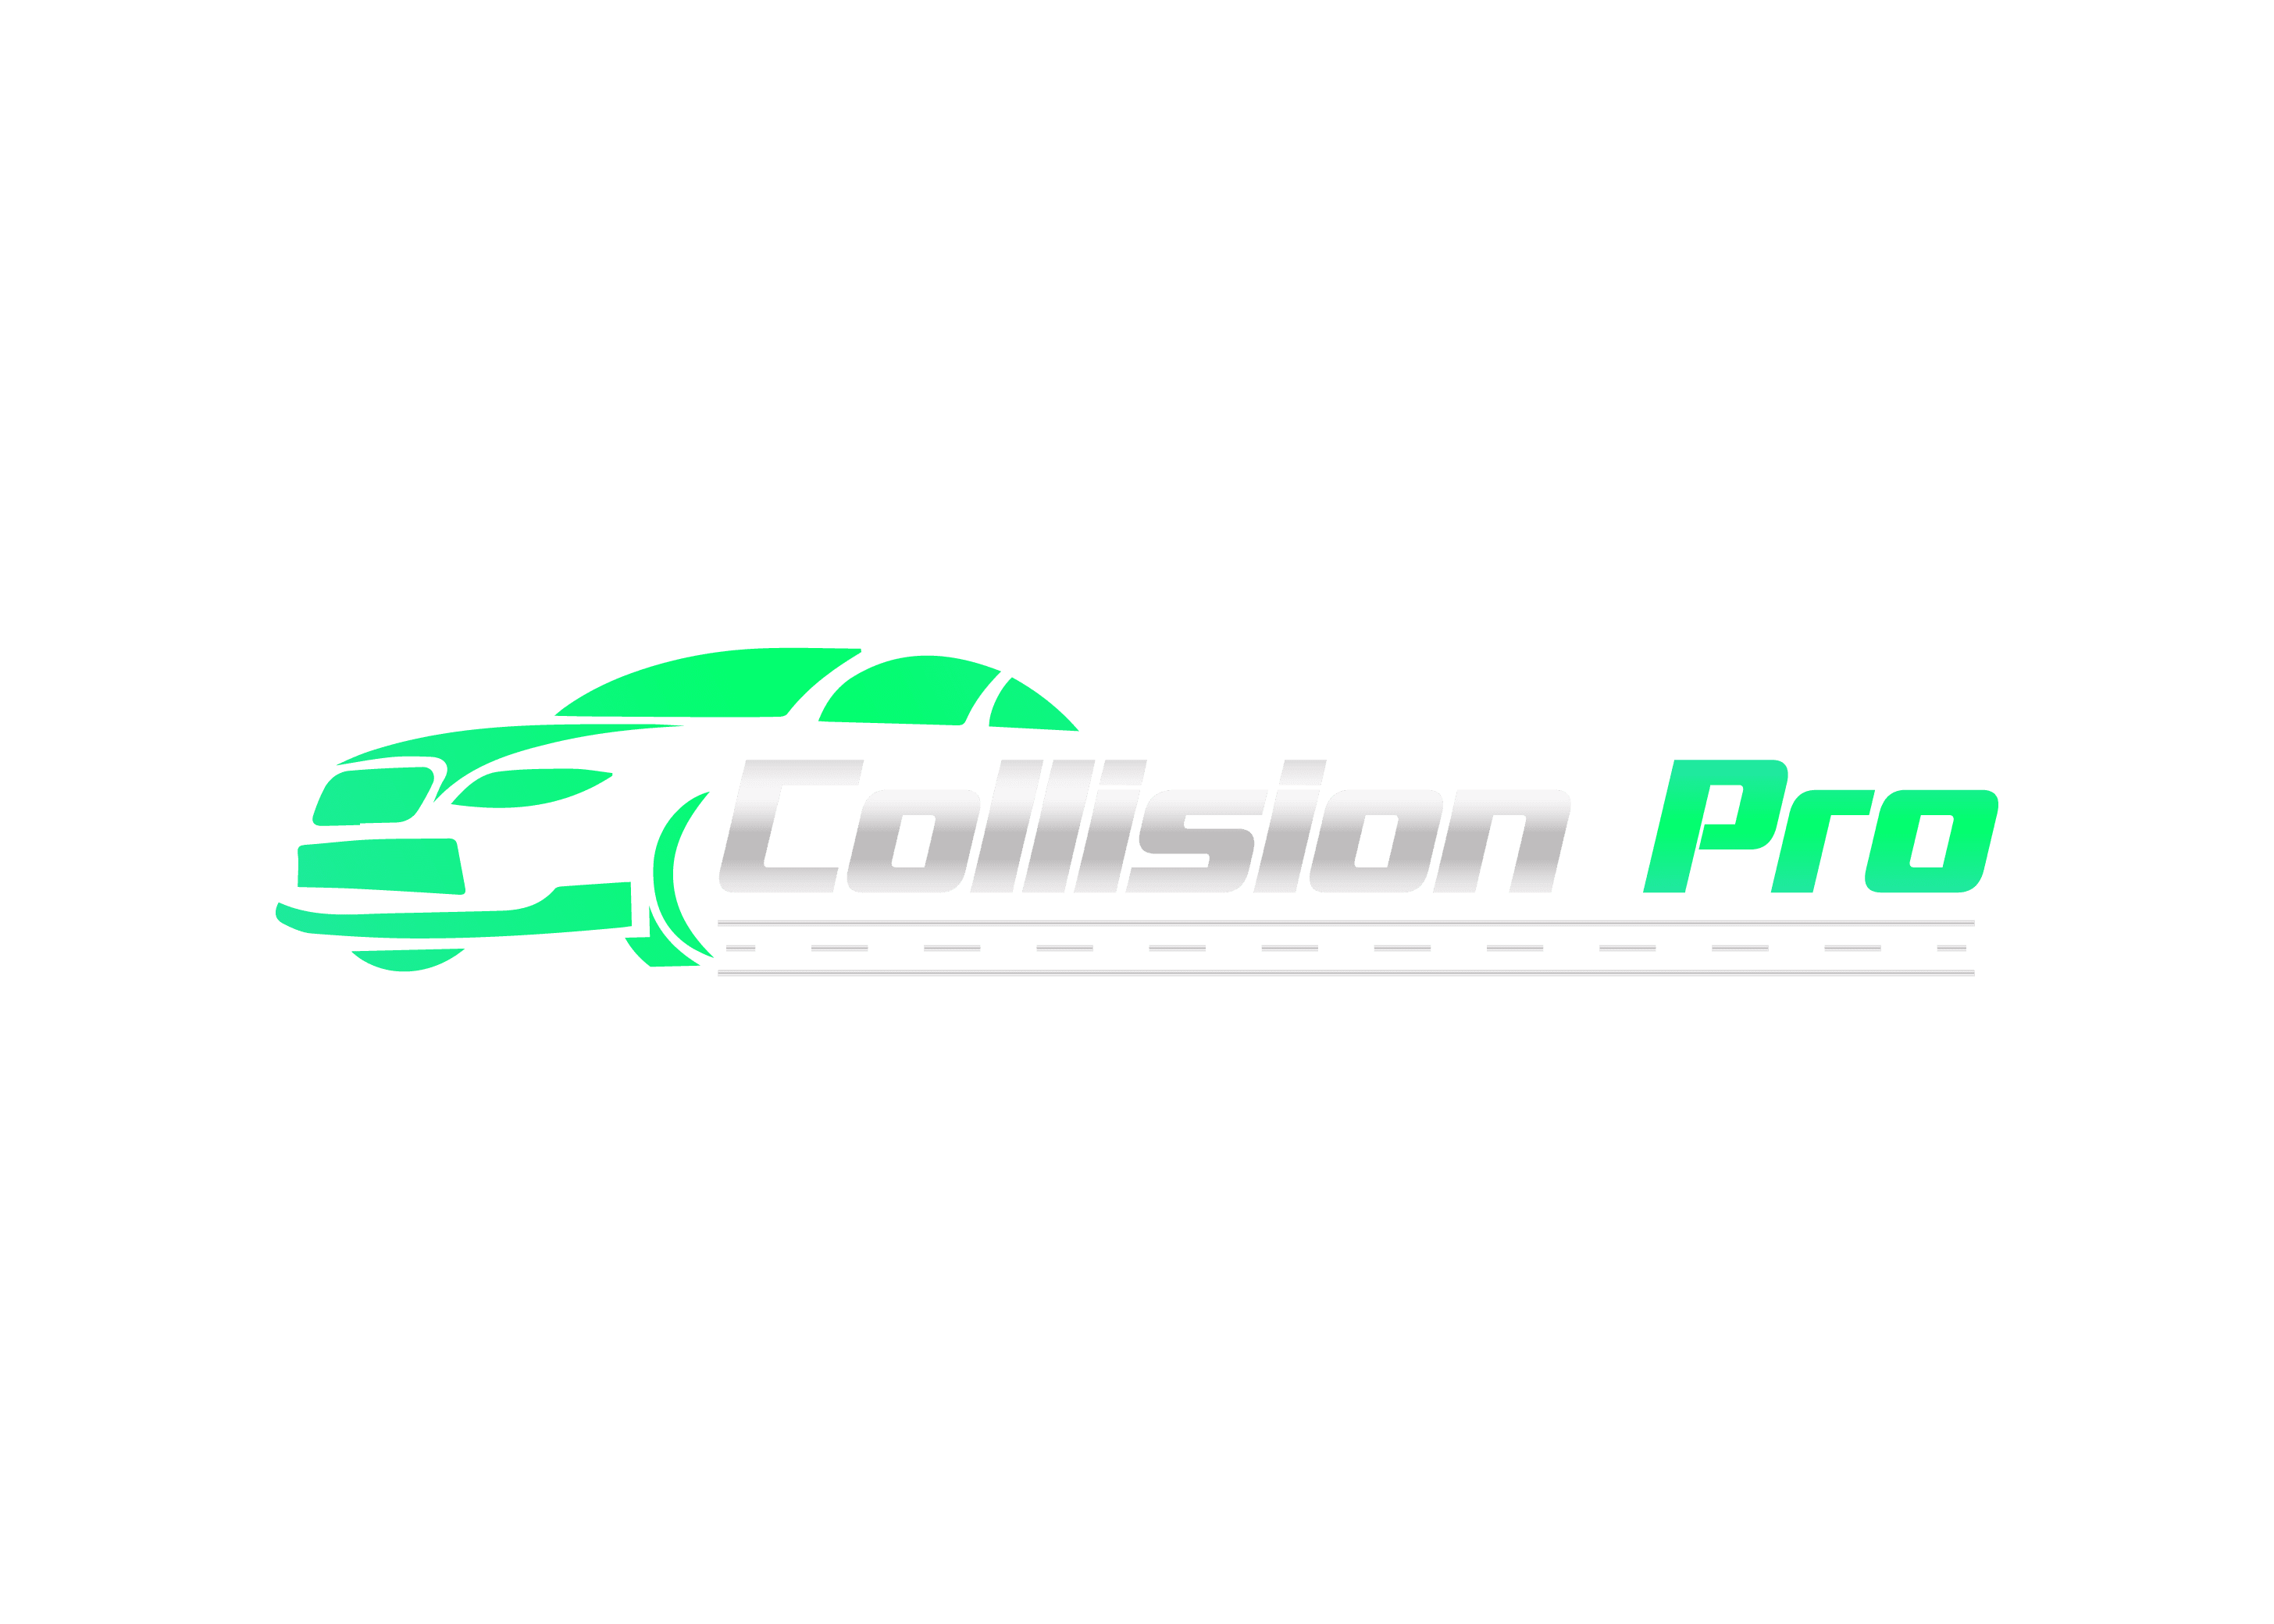 Collision Pro of BR